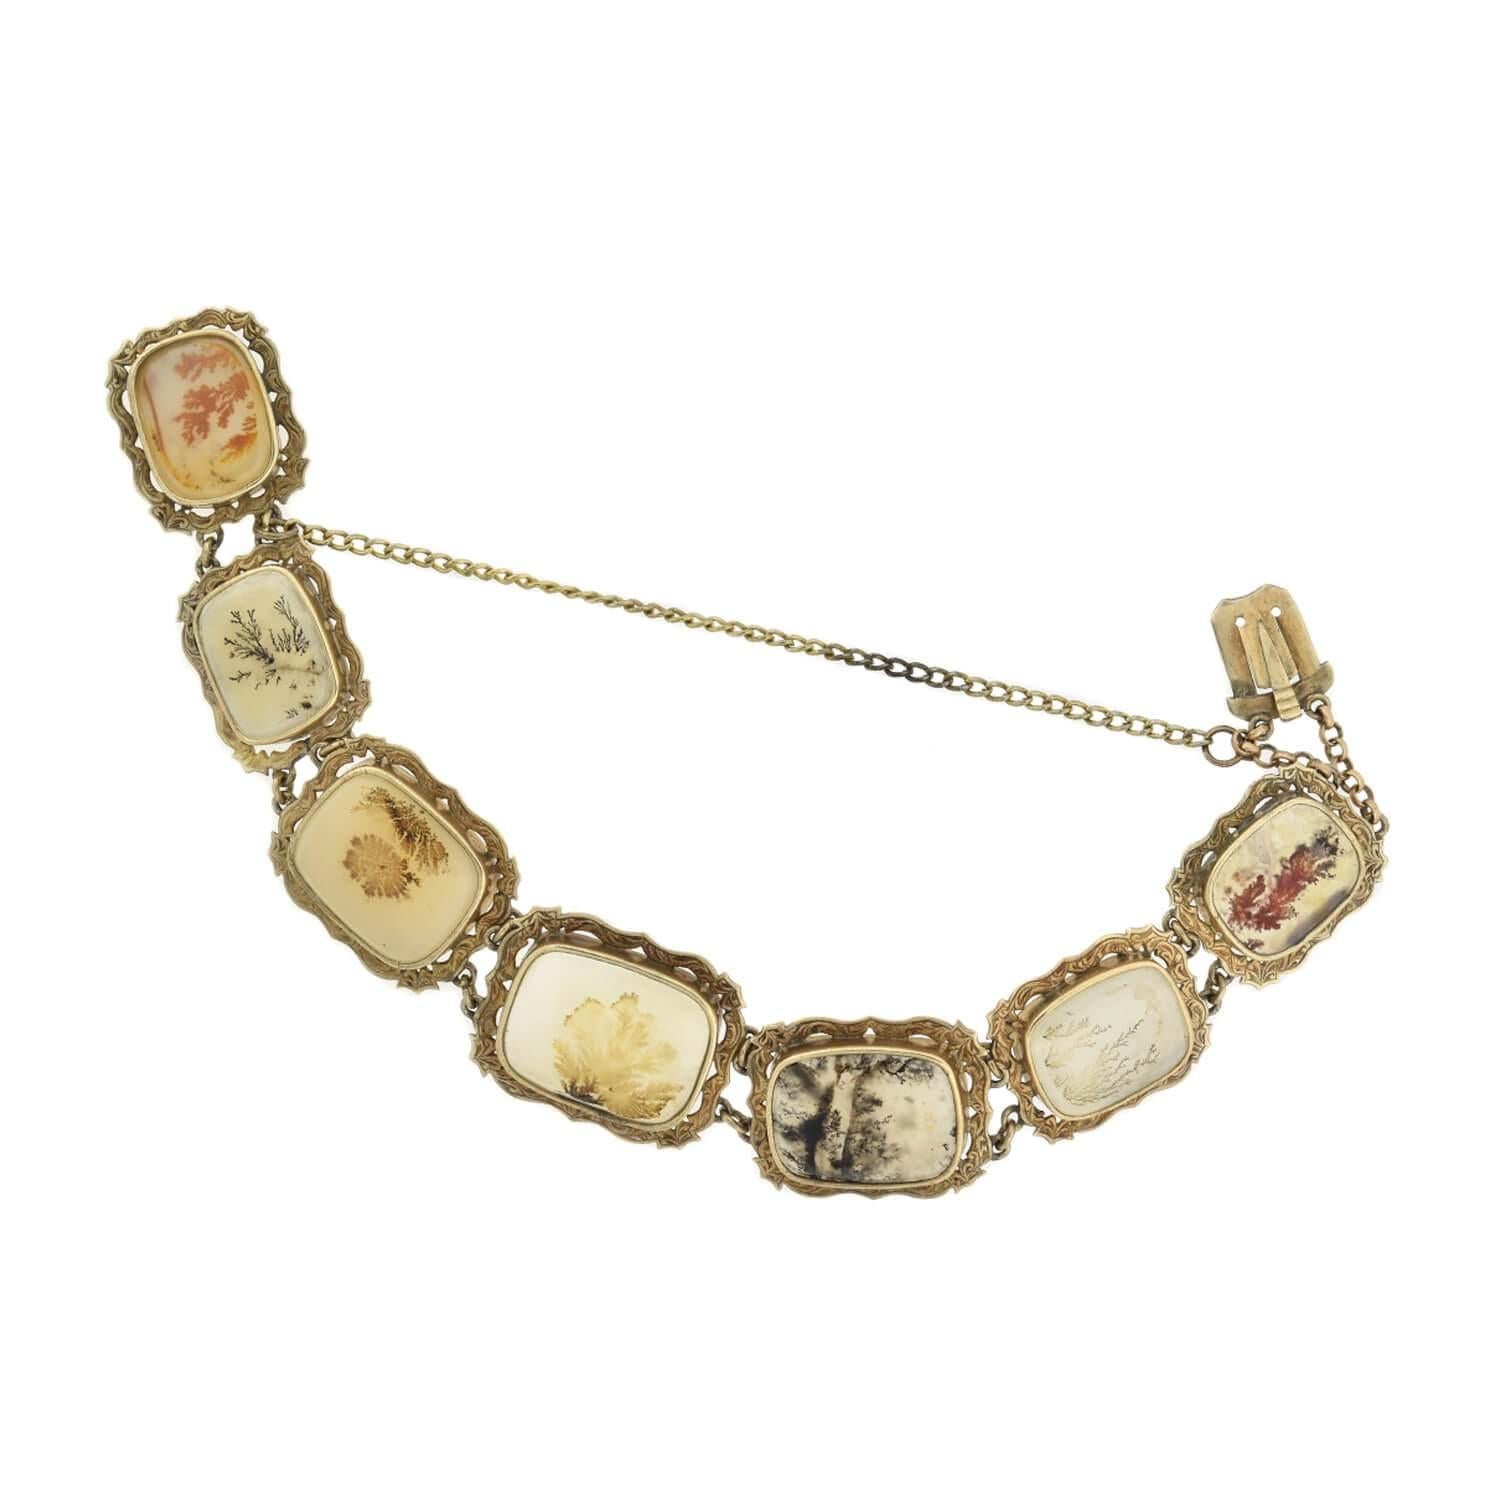 An outstanding dendritic moss agate link bracelet from the Victorian (ca1880) era! This wonderful piece is crafted in rolled gold and comprised of seven agate links that form a fabulous bracelet. Each rectangular link displays a dendritic agate